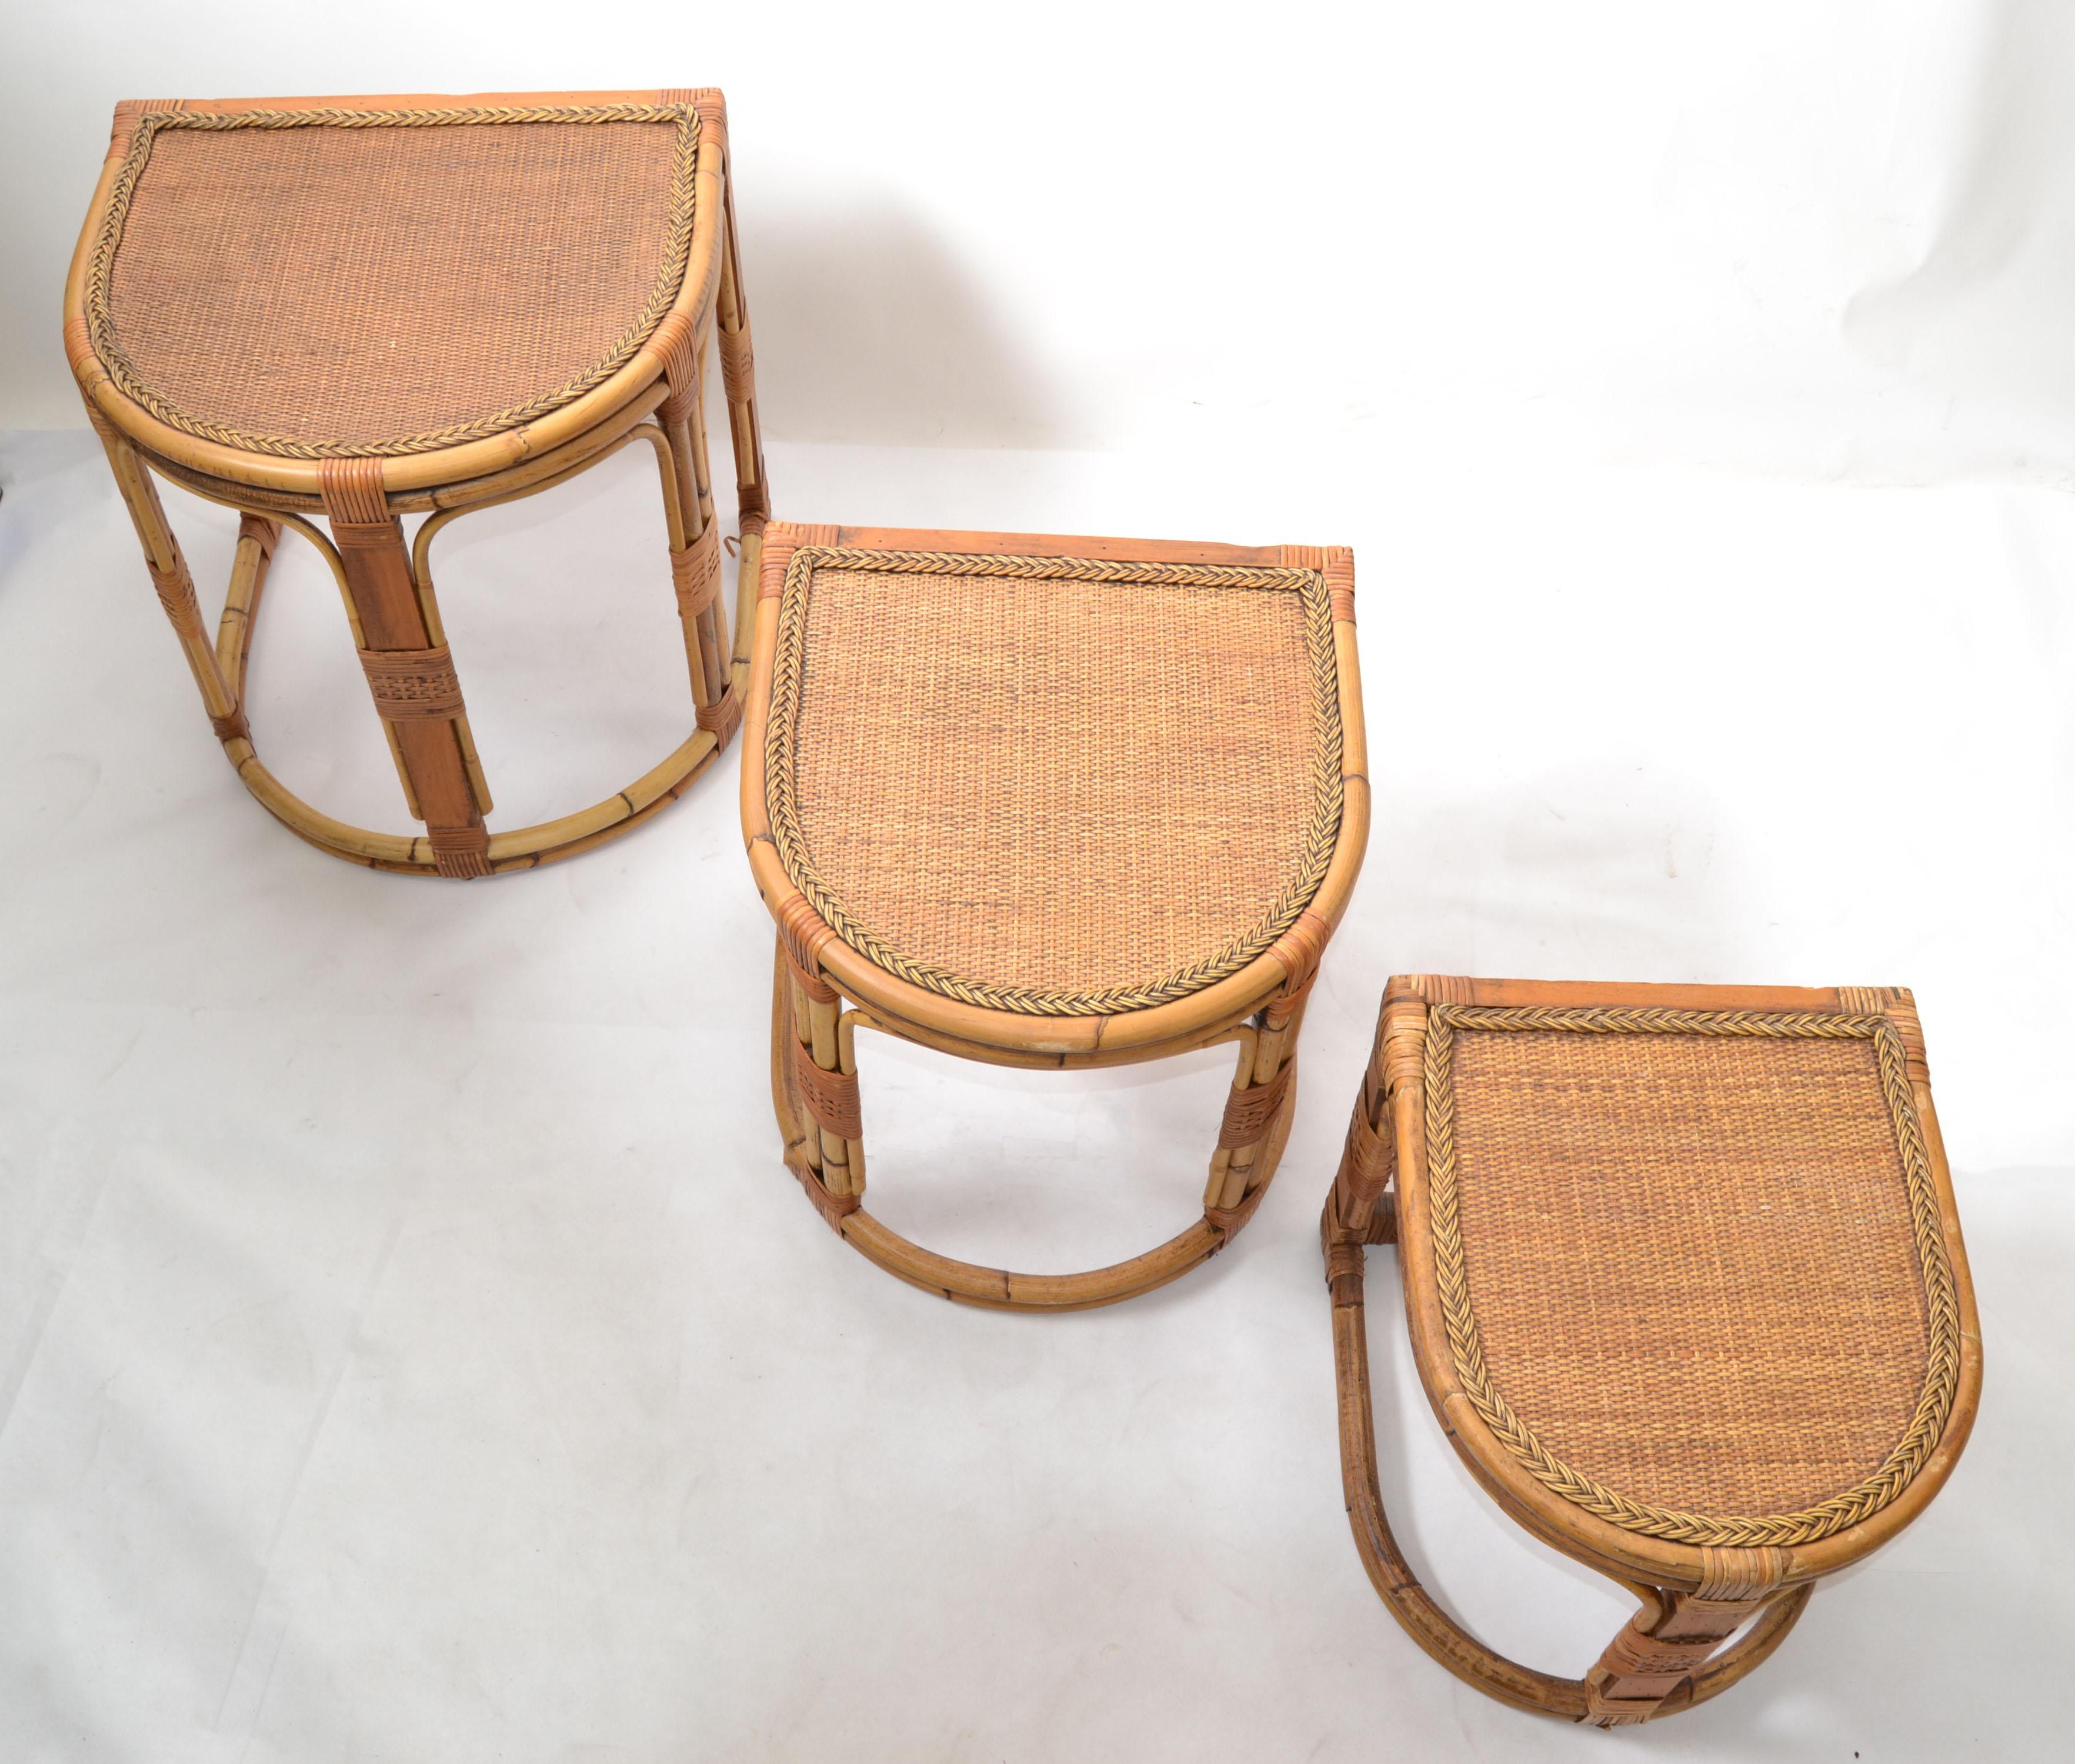 Semi-Circle Bamboo & Cane Nesting Tables / Stacking Tables Handcrafted, Set of 3 For Sale 2